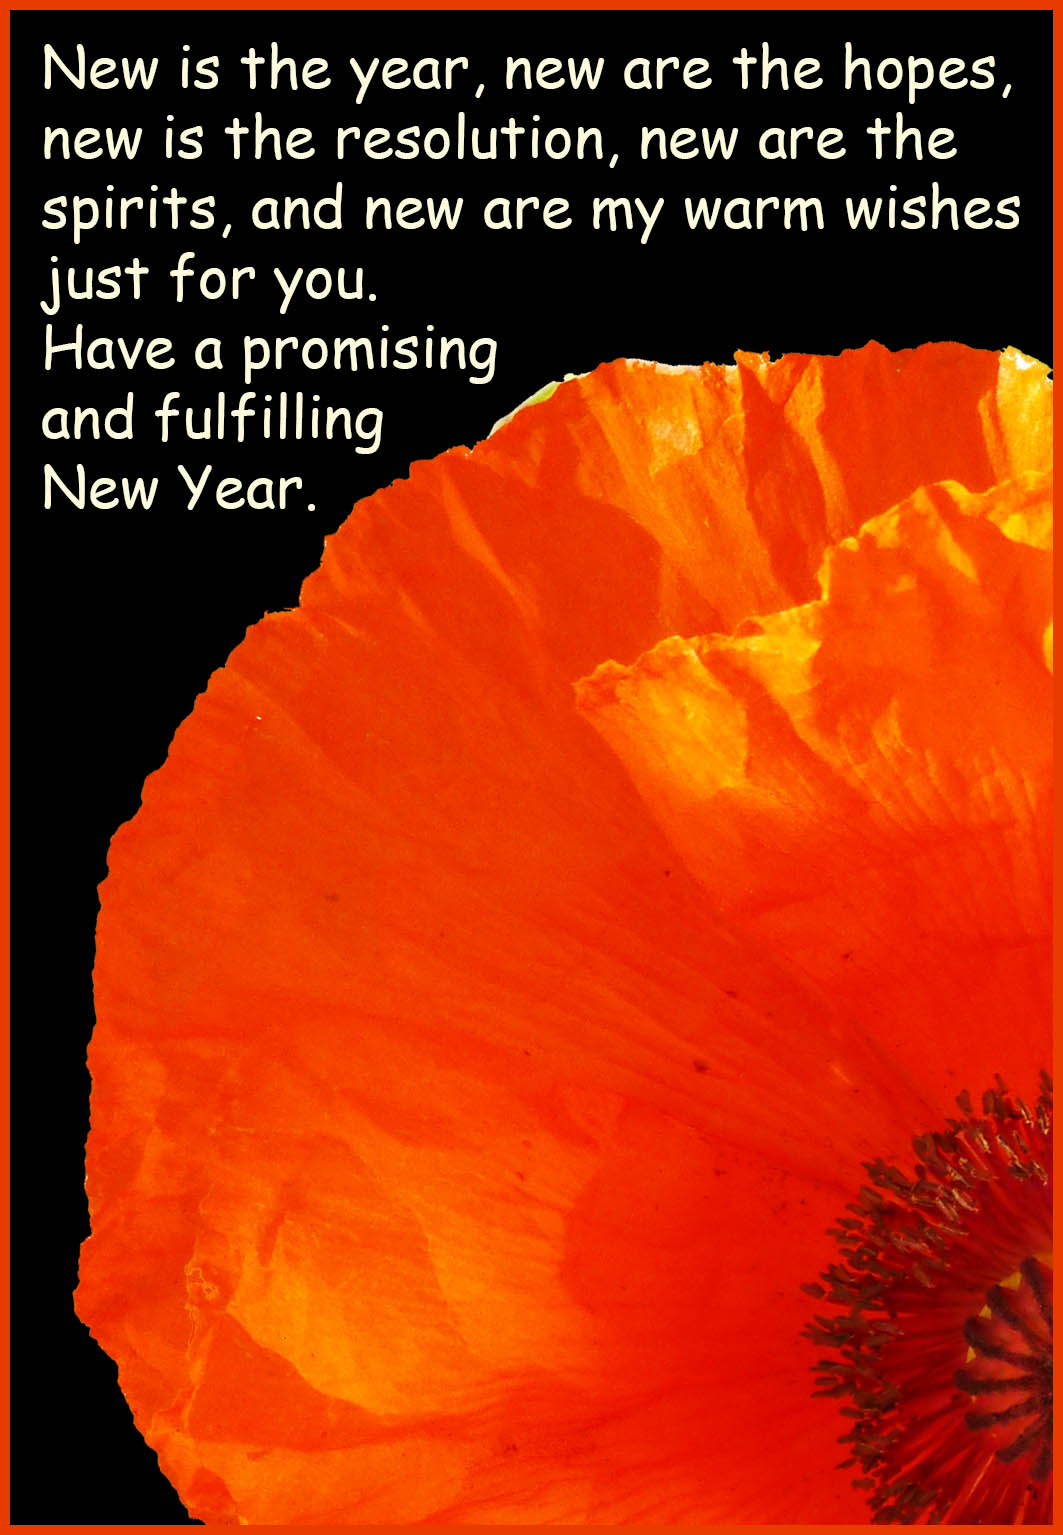 New Year card with red poppy